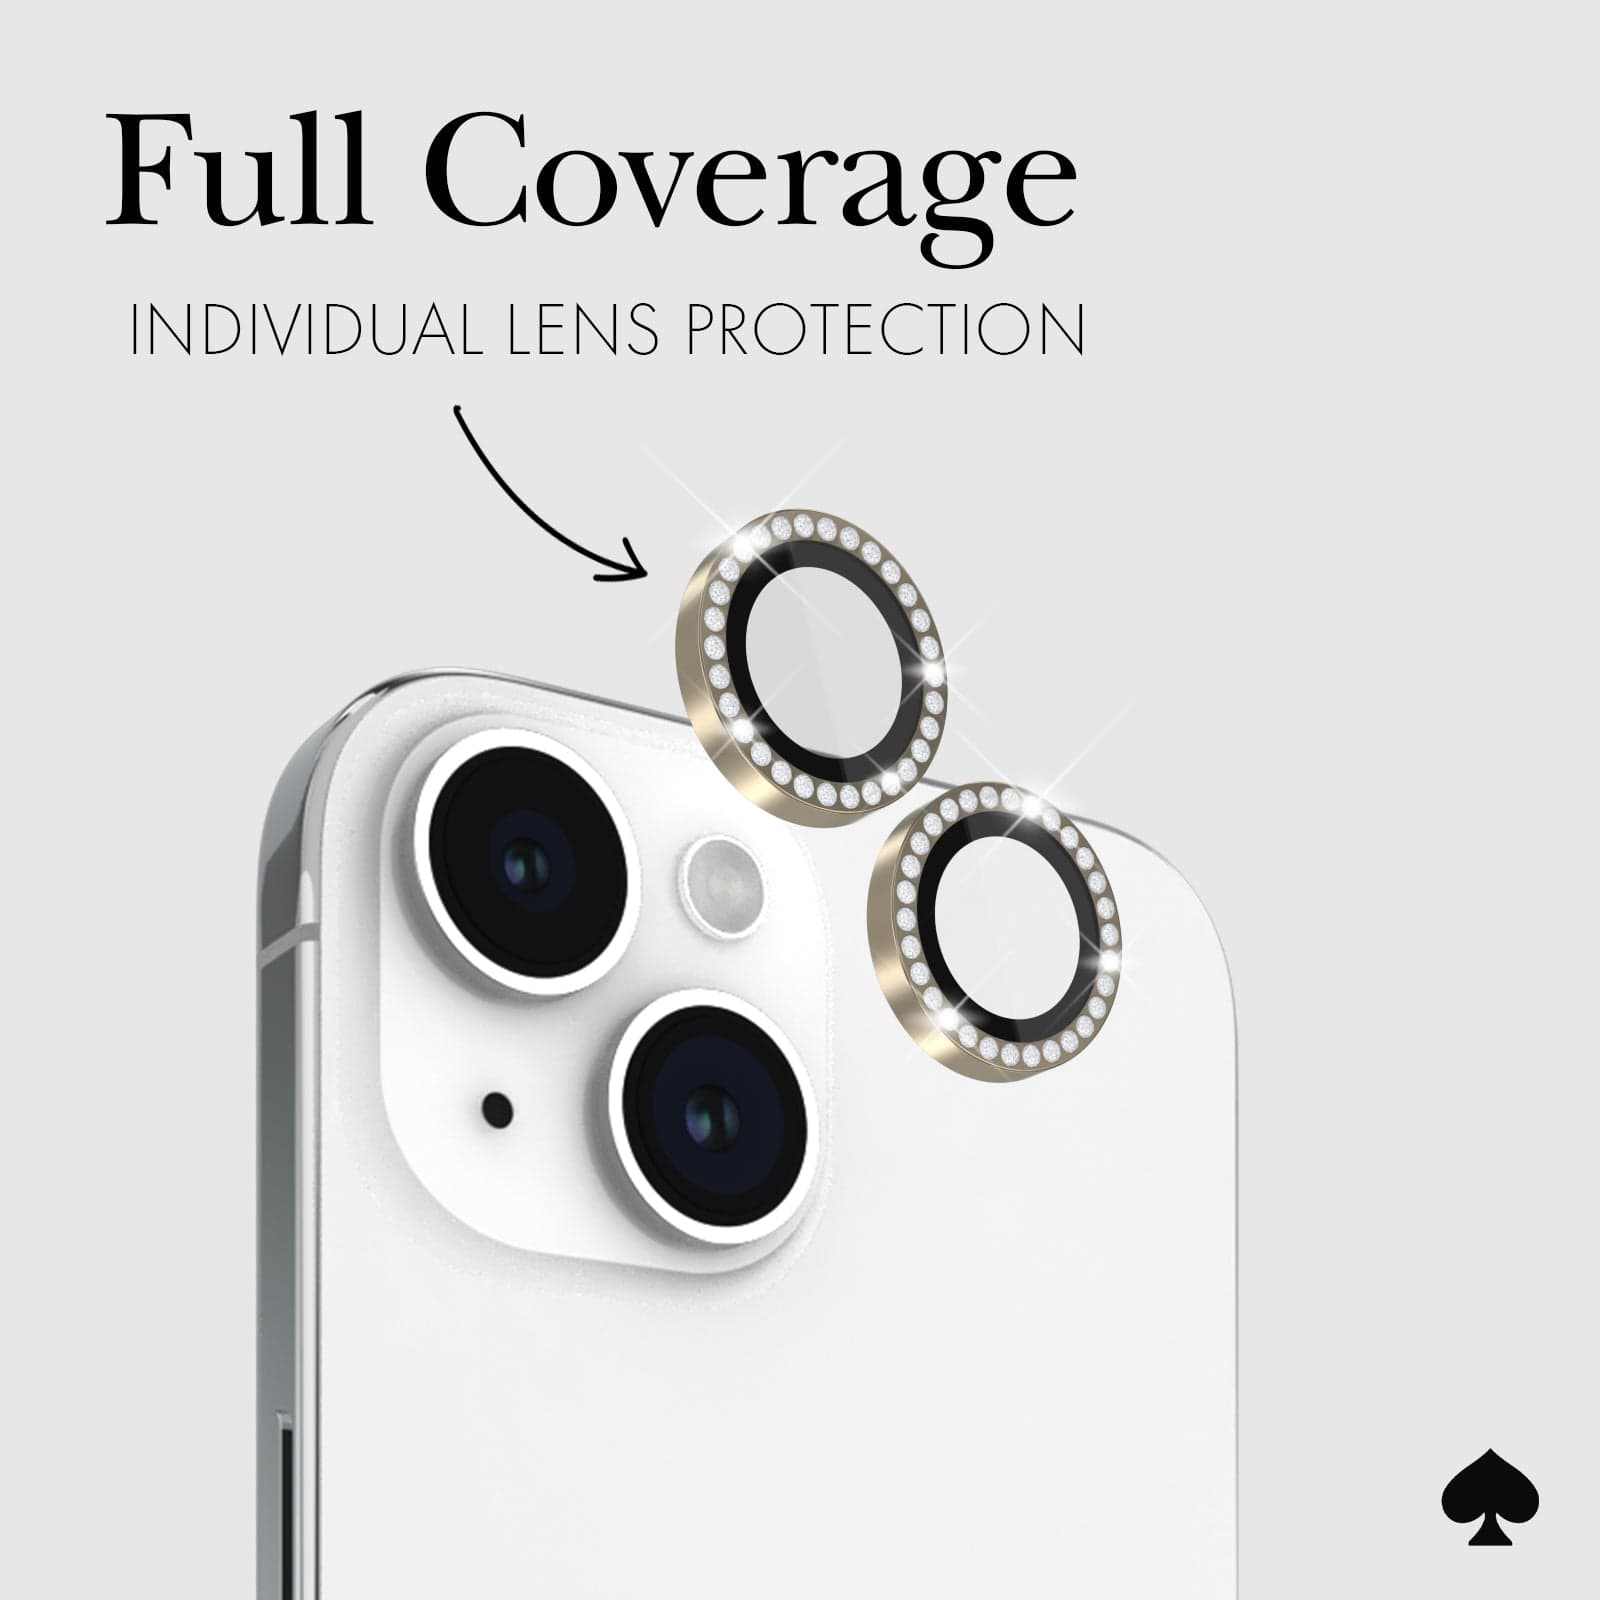 FULL COVERAGE INDIVIDUAL LENS PROTECTION